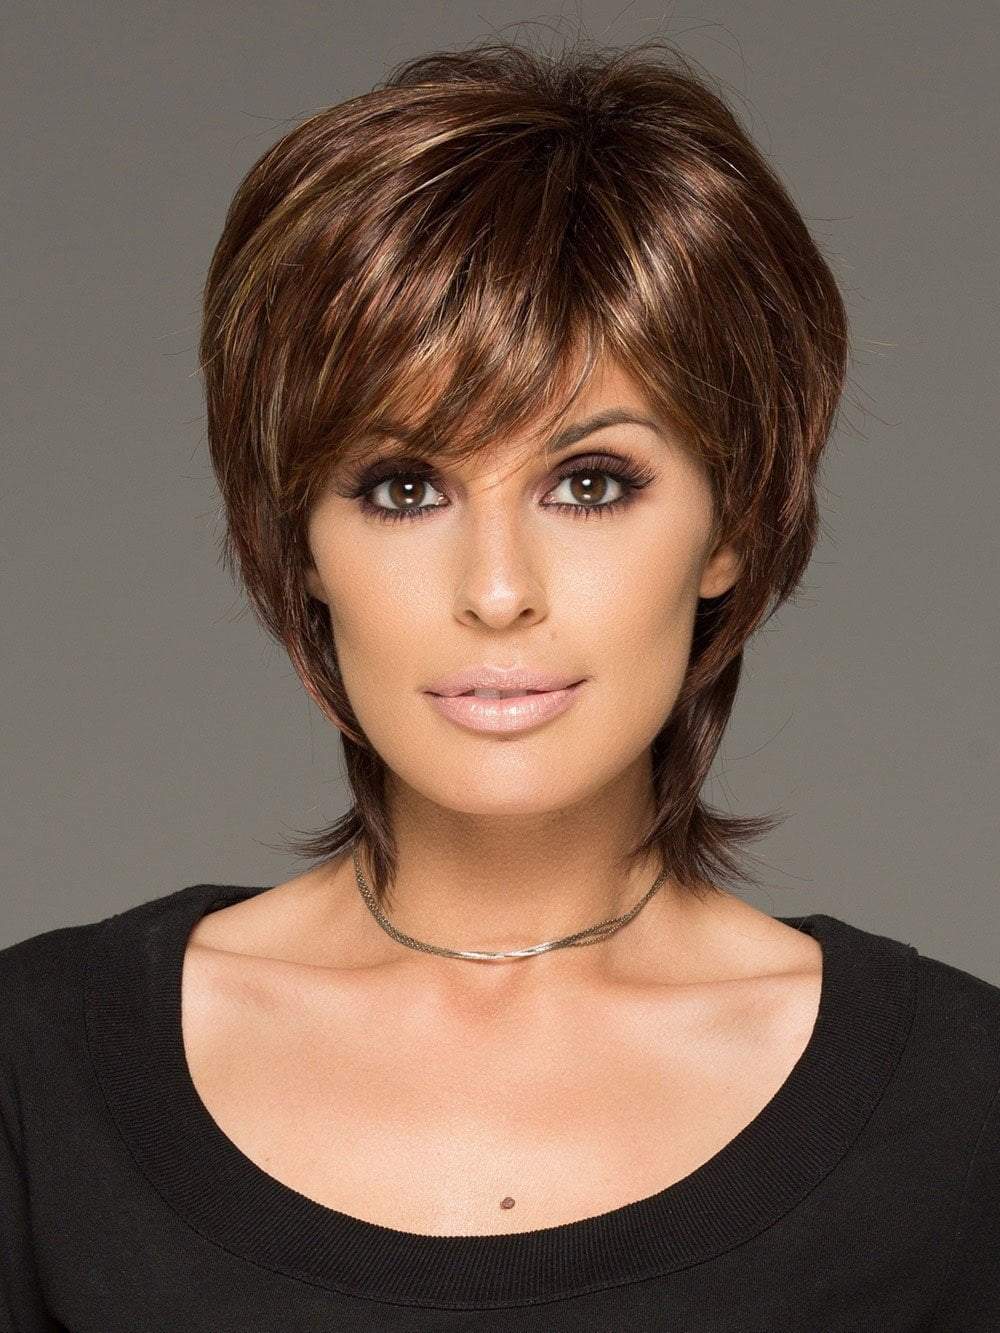 This cutting edge hair style has gorgeous layers and a long wispy nape for texture & easy styling